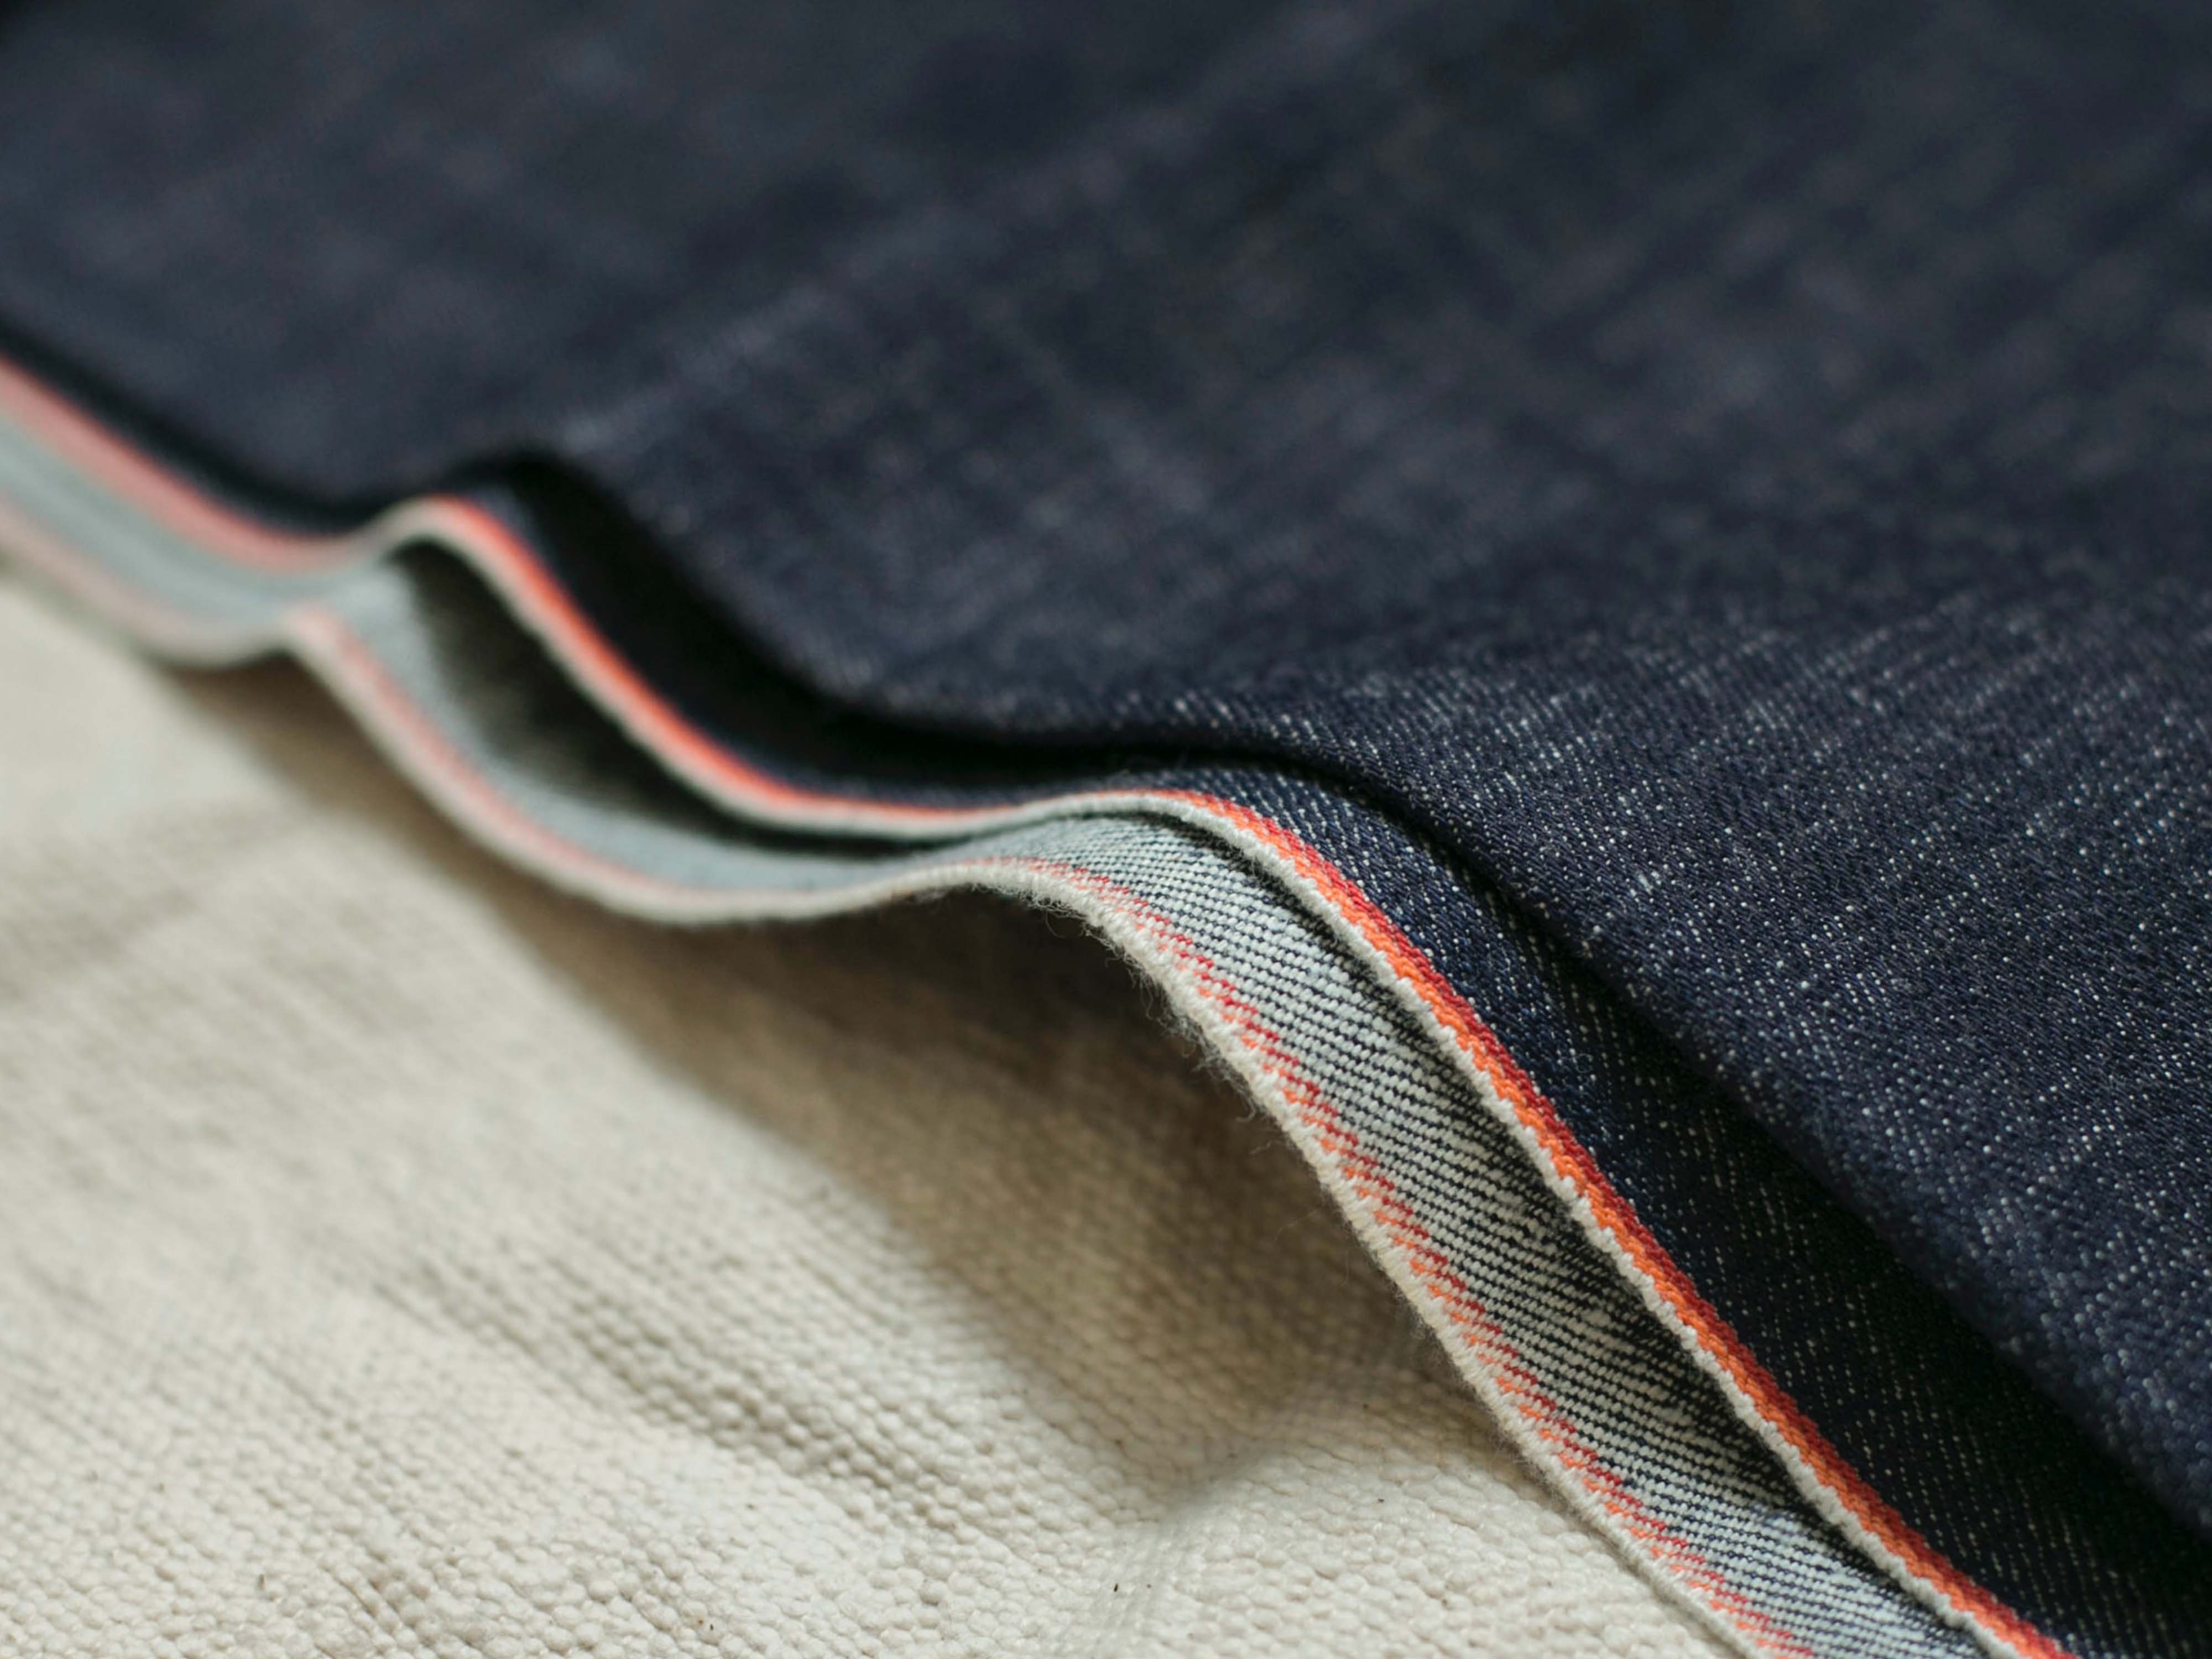 Different Types of Denim Explained - Dalston Mill Fabrics